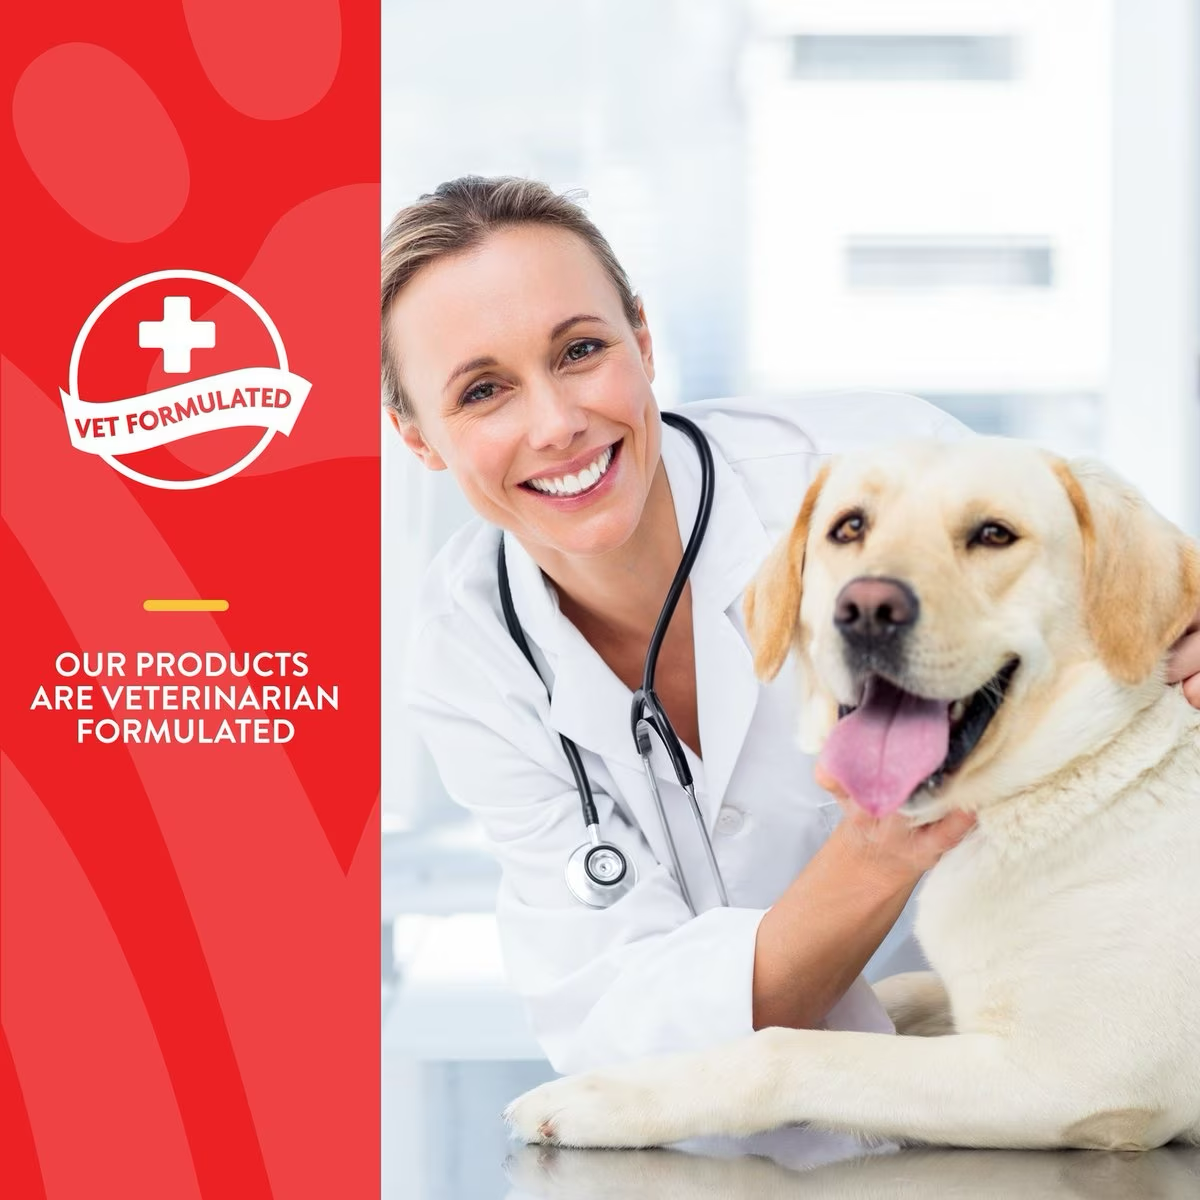 Naturvet Dog Scoopables Allergy Aid Supplement  Health Care  | PetMax Canada